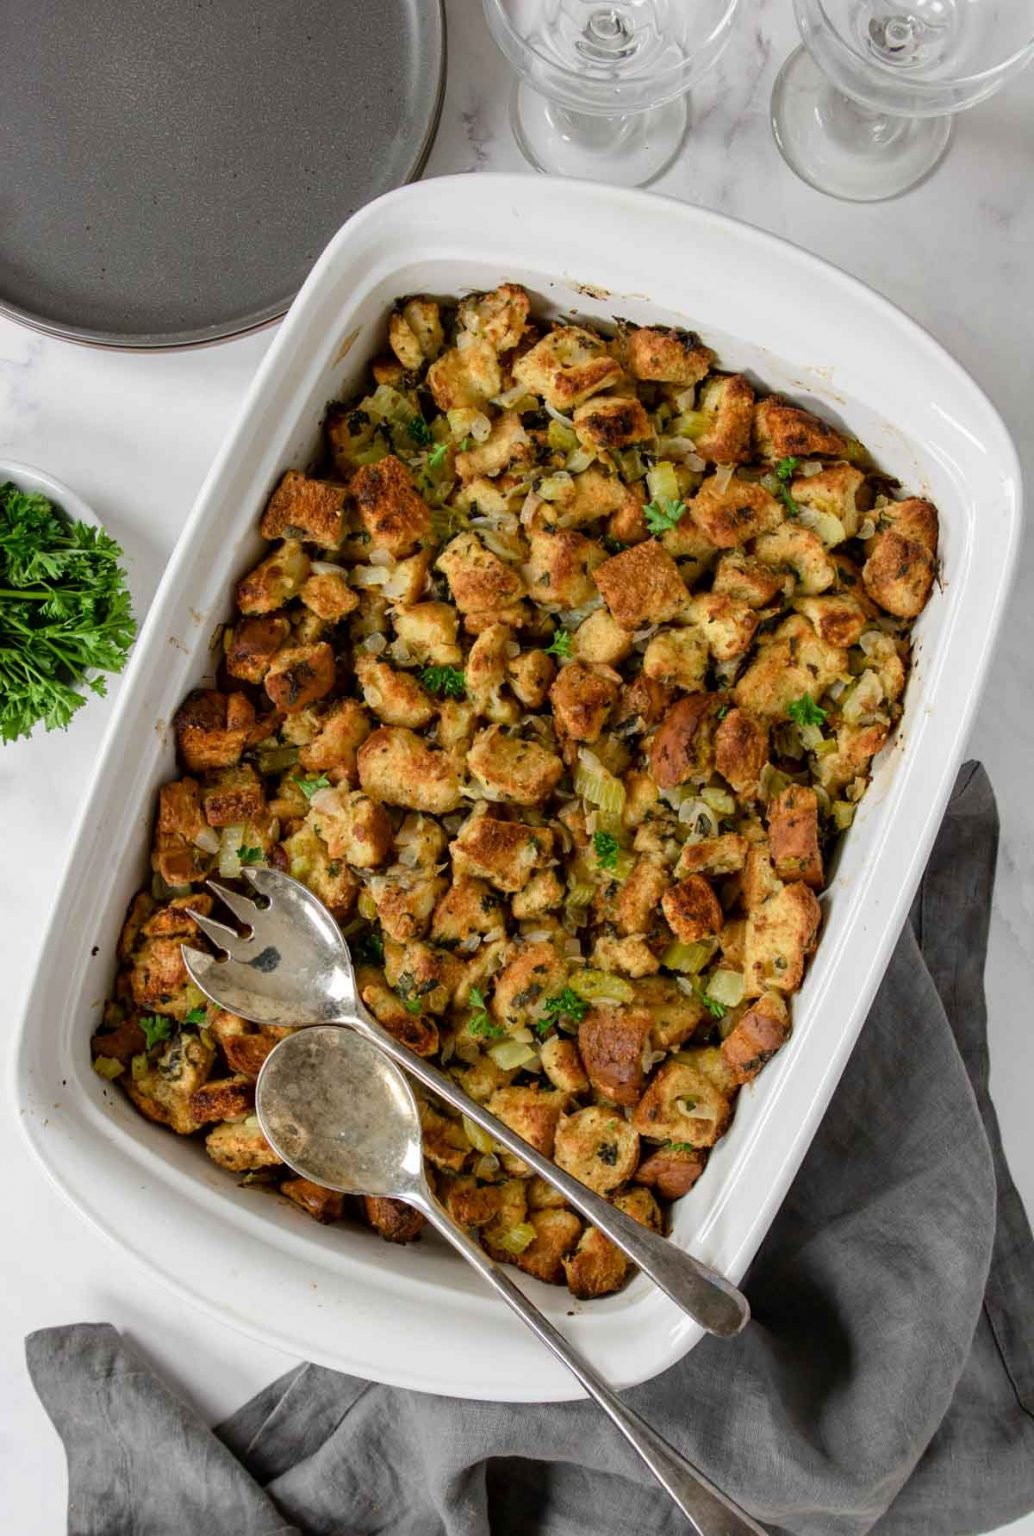 Homemade Stuffing | Traditional bread stuffing recipe - Mom's Dinner